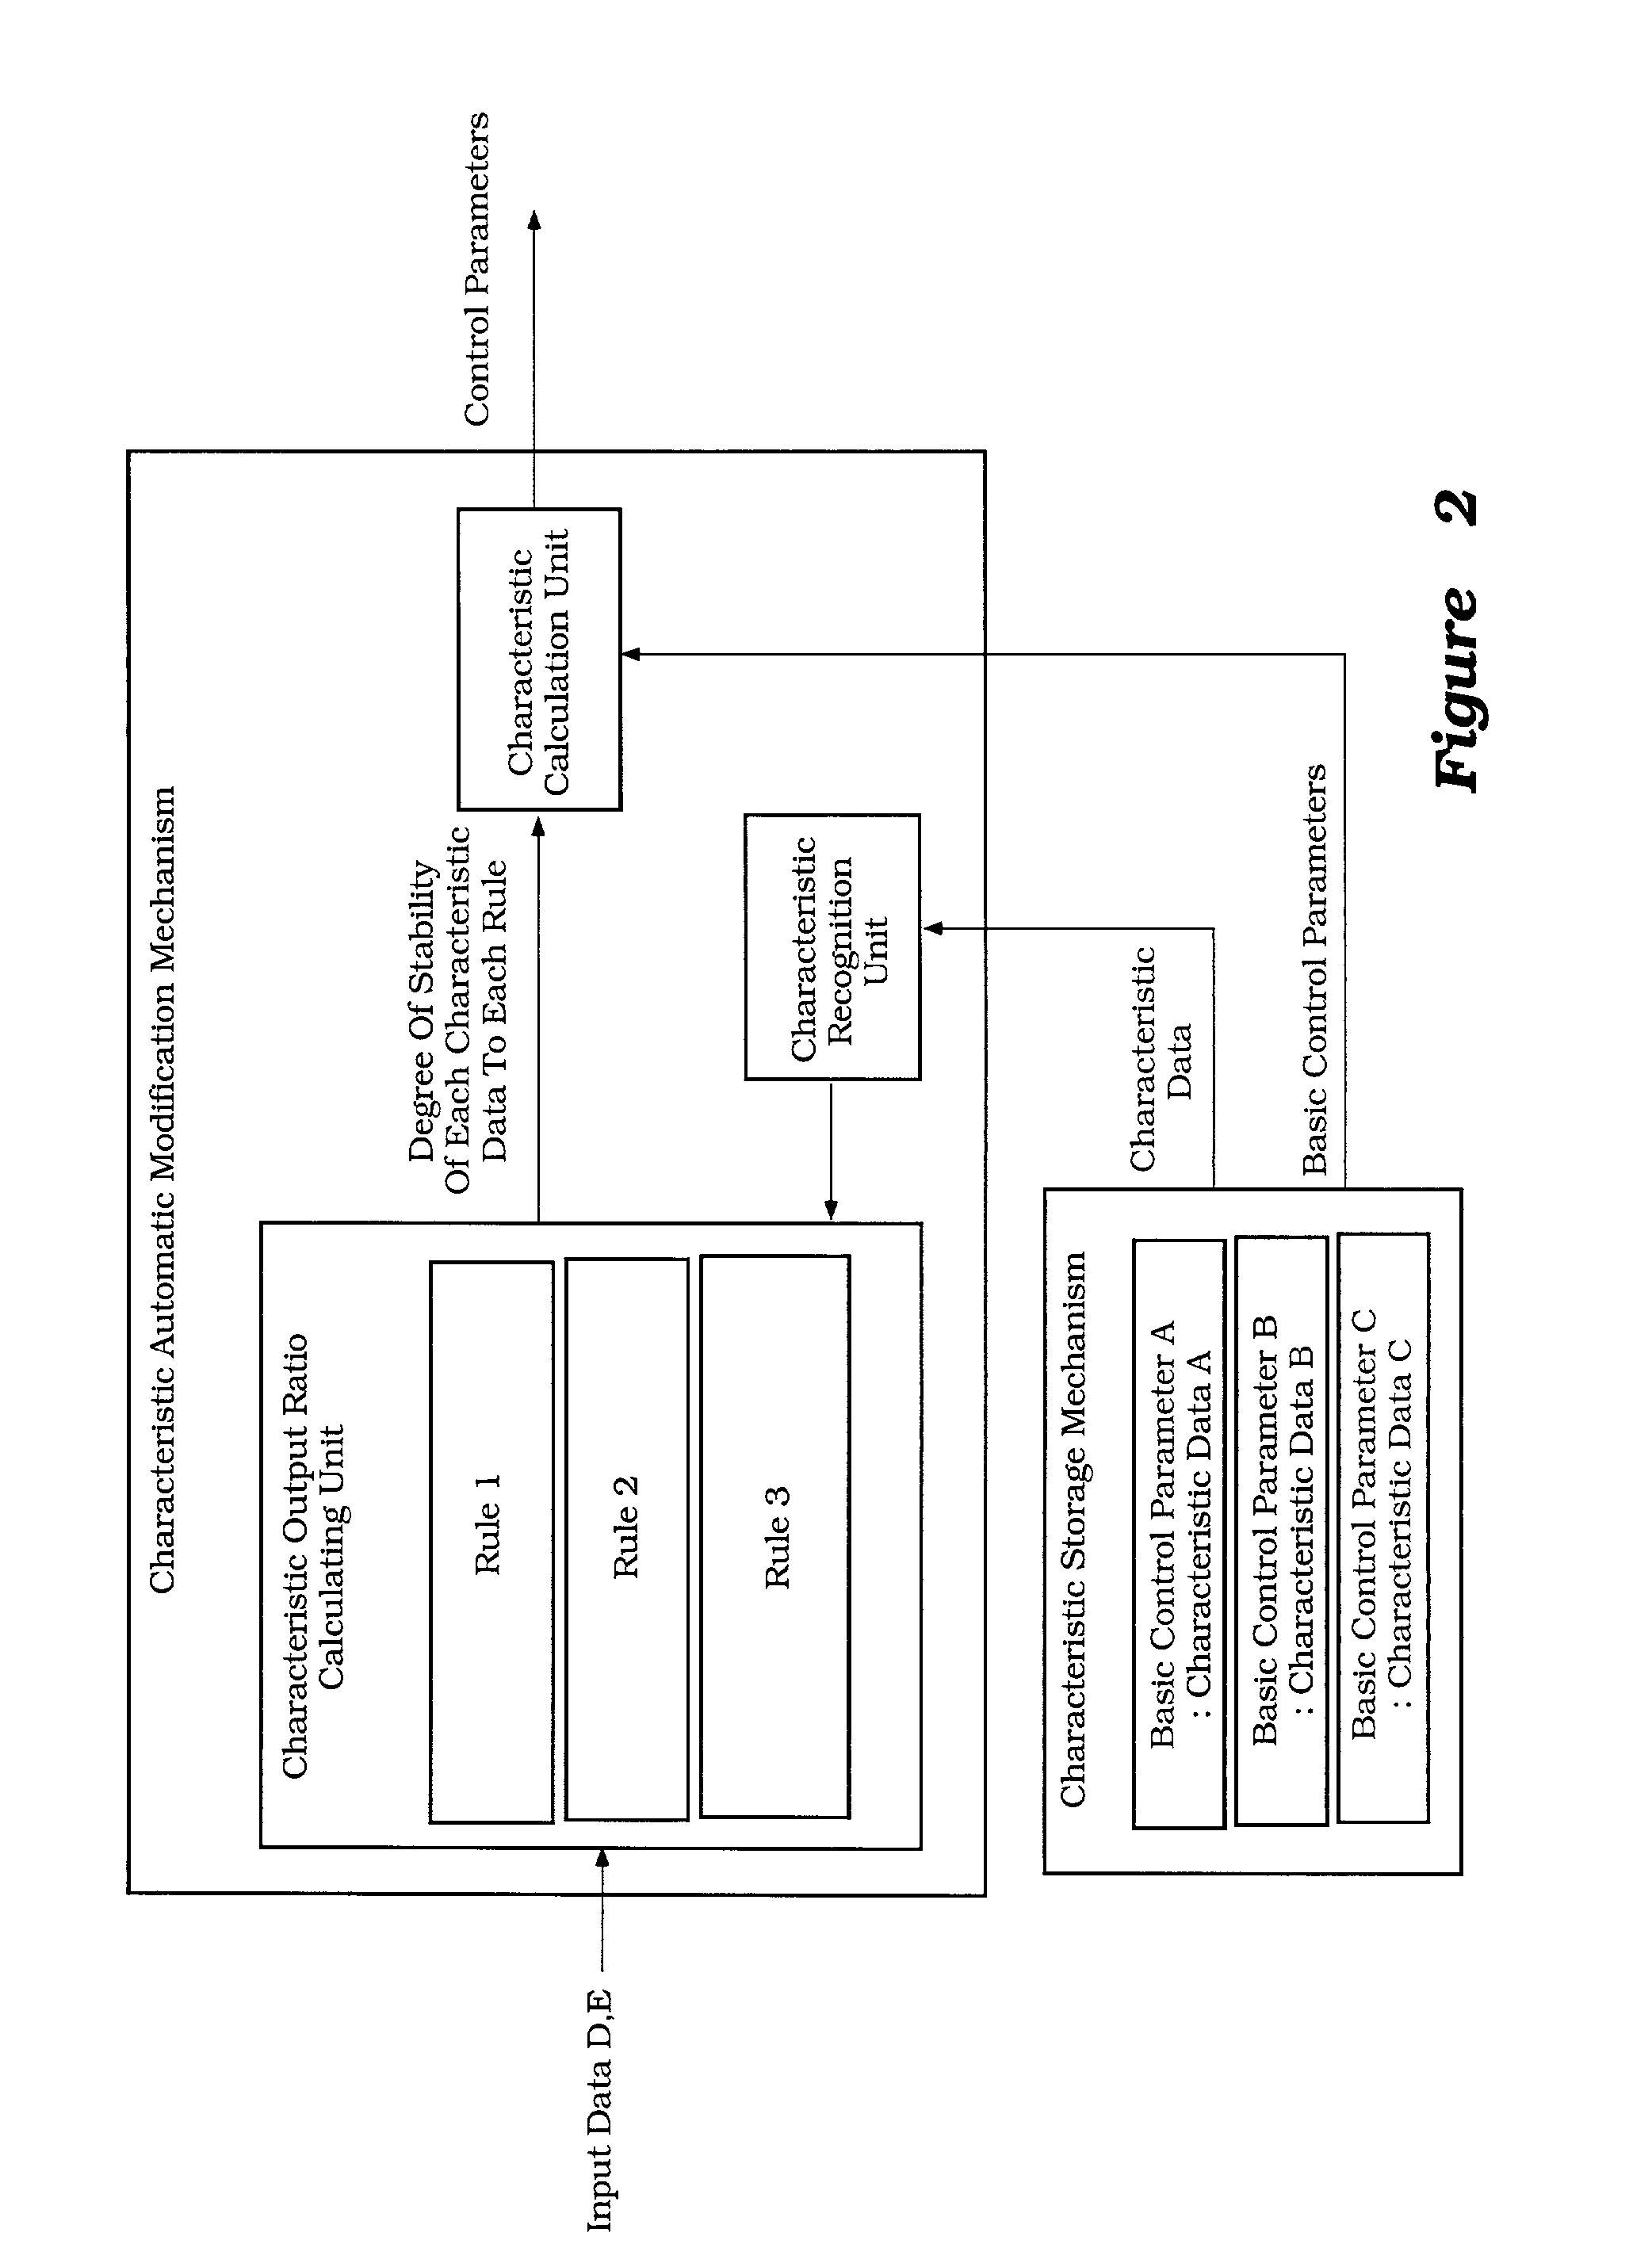 Characteristic control device for control subject